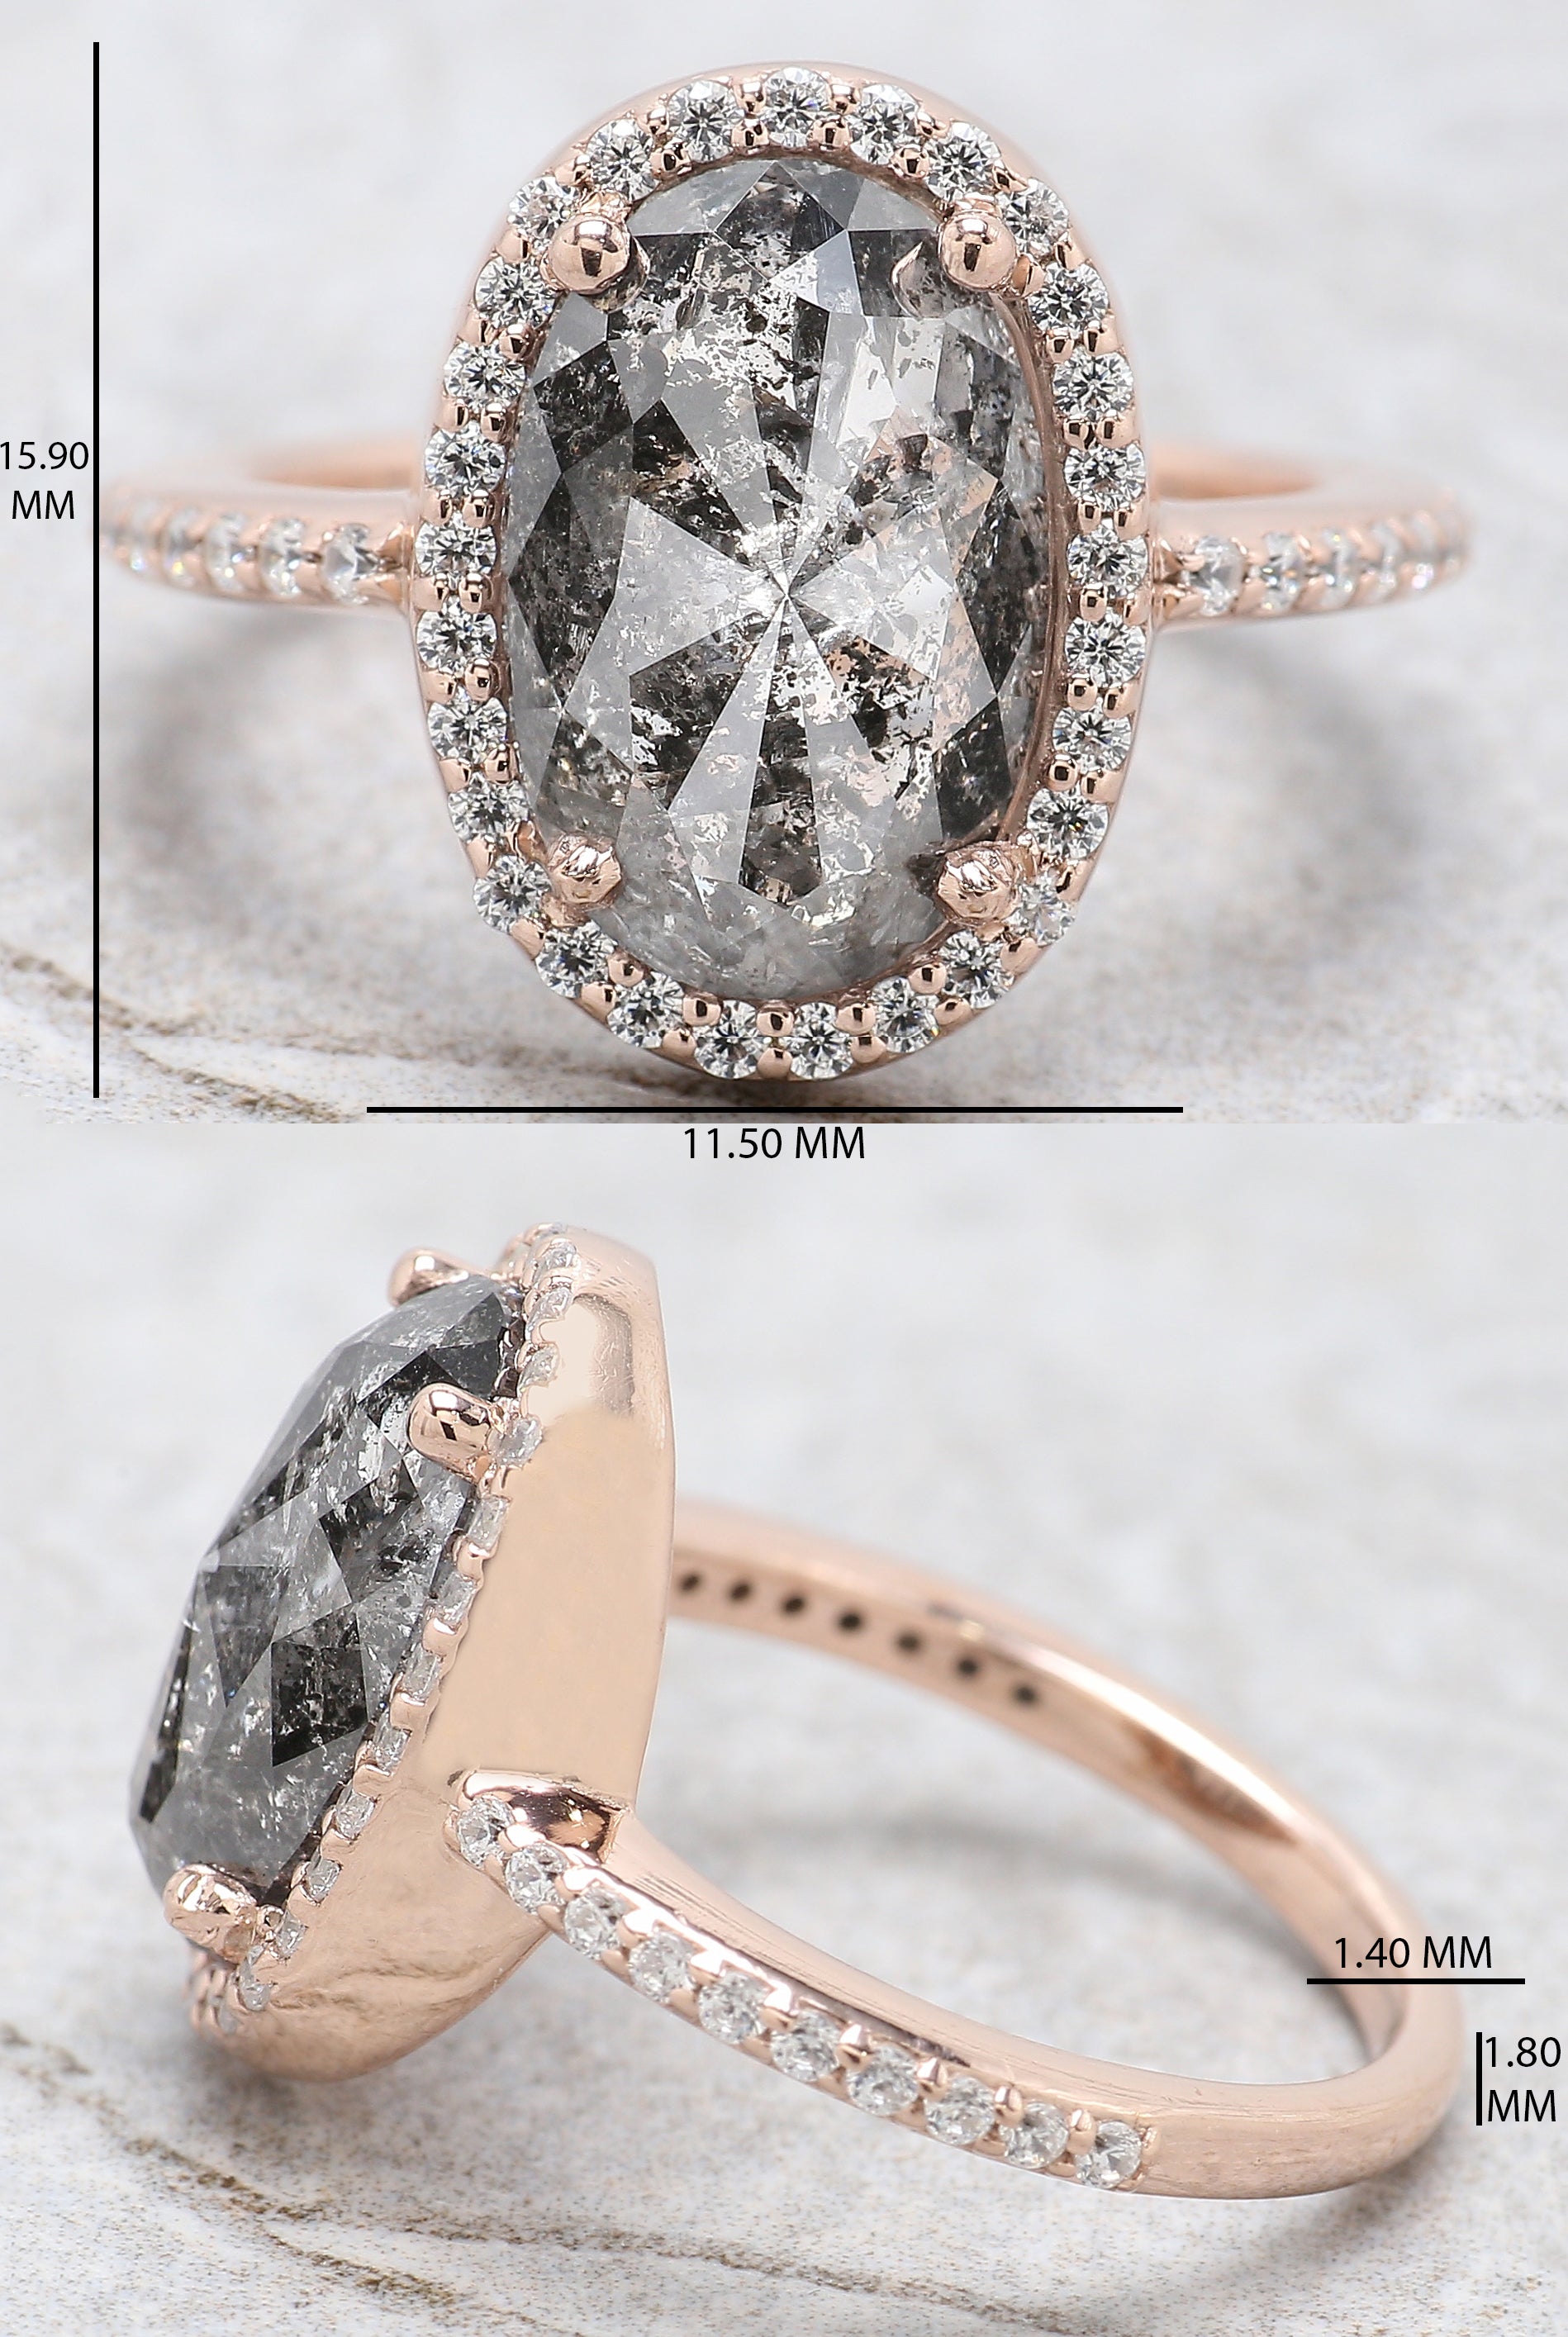 Oval Cut Salt And Pepper Diamond Ring 4.30 Ct 12.72 MM Oval Diamond Ring 14K Solid Rose Gold Silver Engagement Ring Gift For Her KDL2429